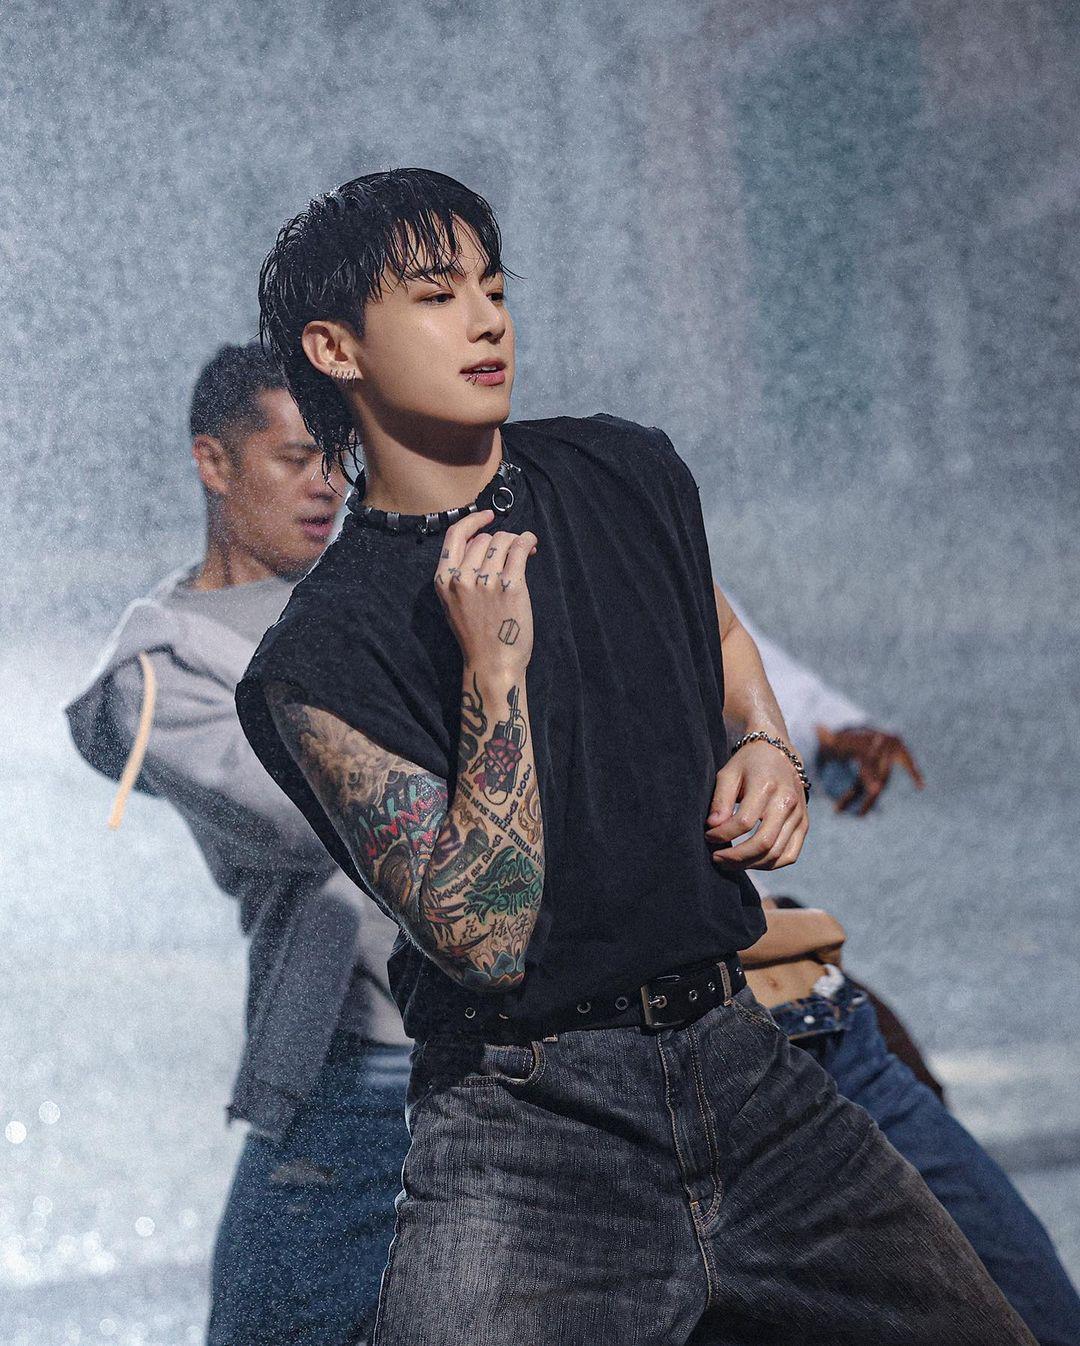 One of the main dancers of BTS, Jungkook showed off his smooth moves in this music video. He is also seen getting wet in the rain in this scene, upping the hotness quotient